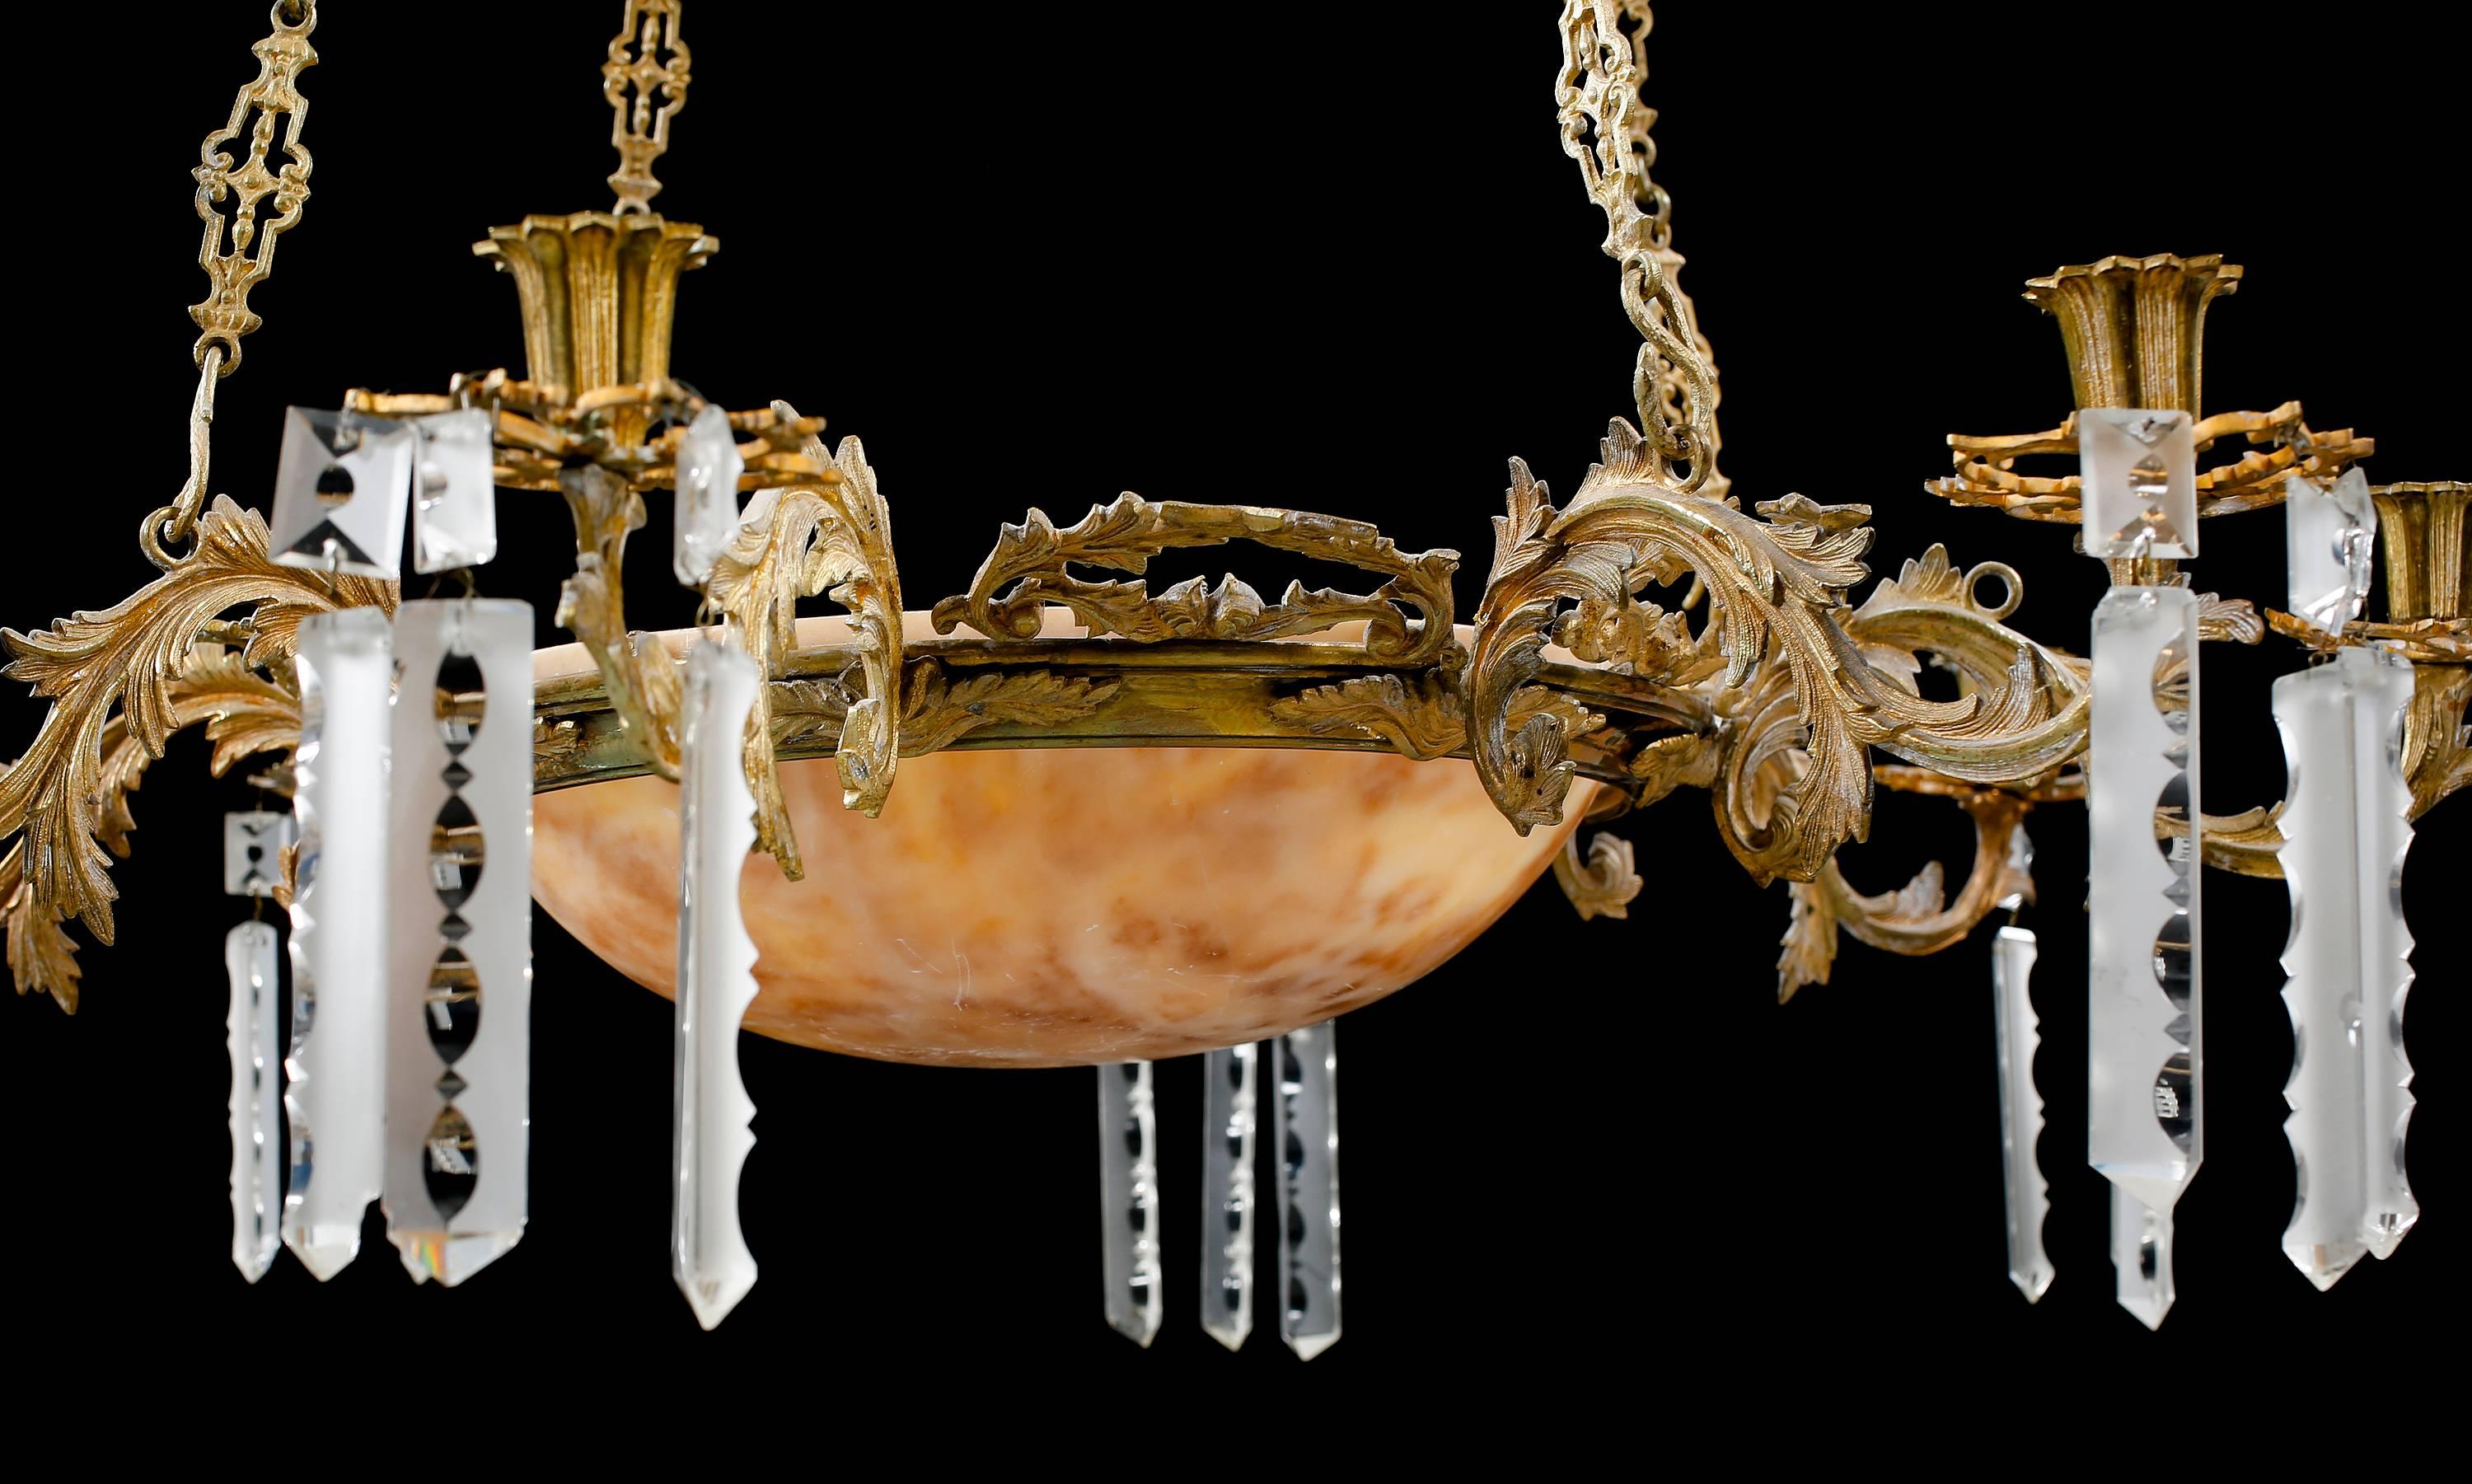 Lare, late 19th century Swedish chandelier. Bronze, crystal and alabaster.
Not electrified, electrical wiring available upon request.